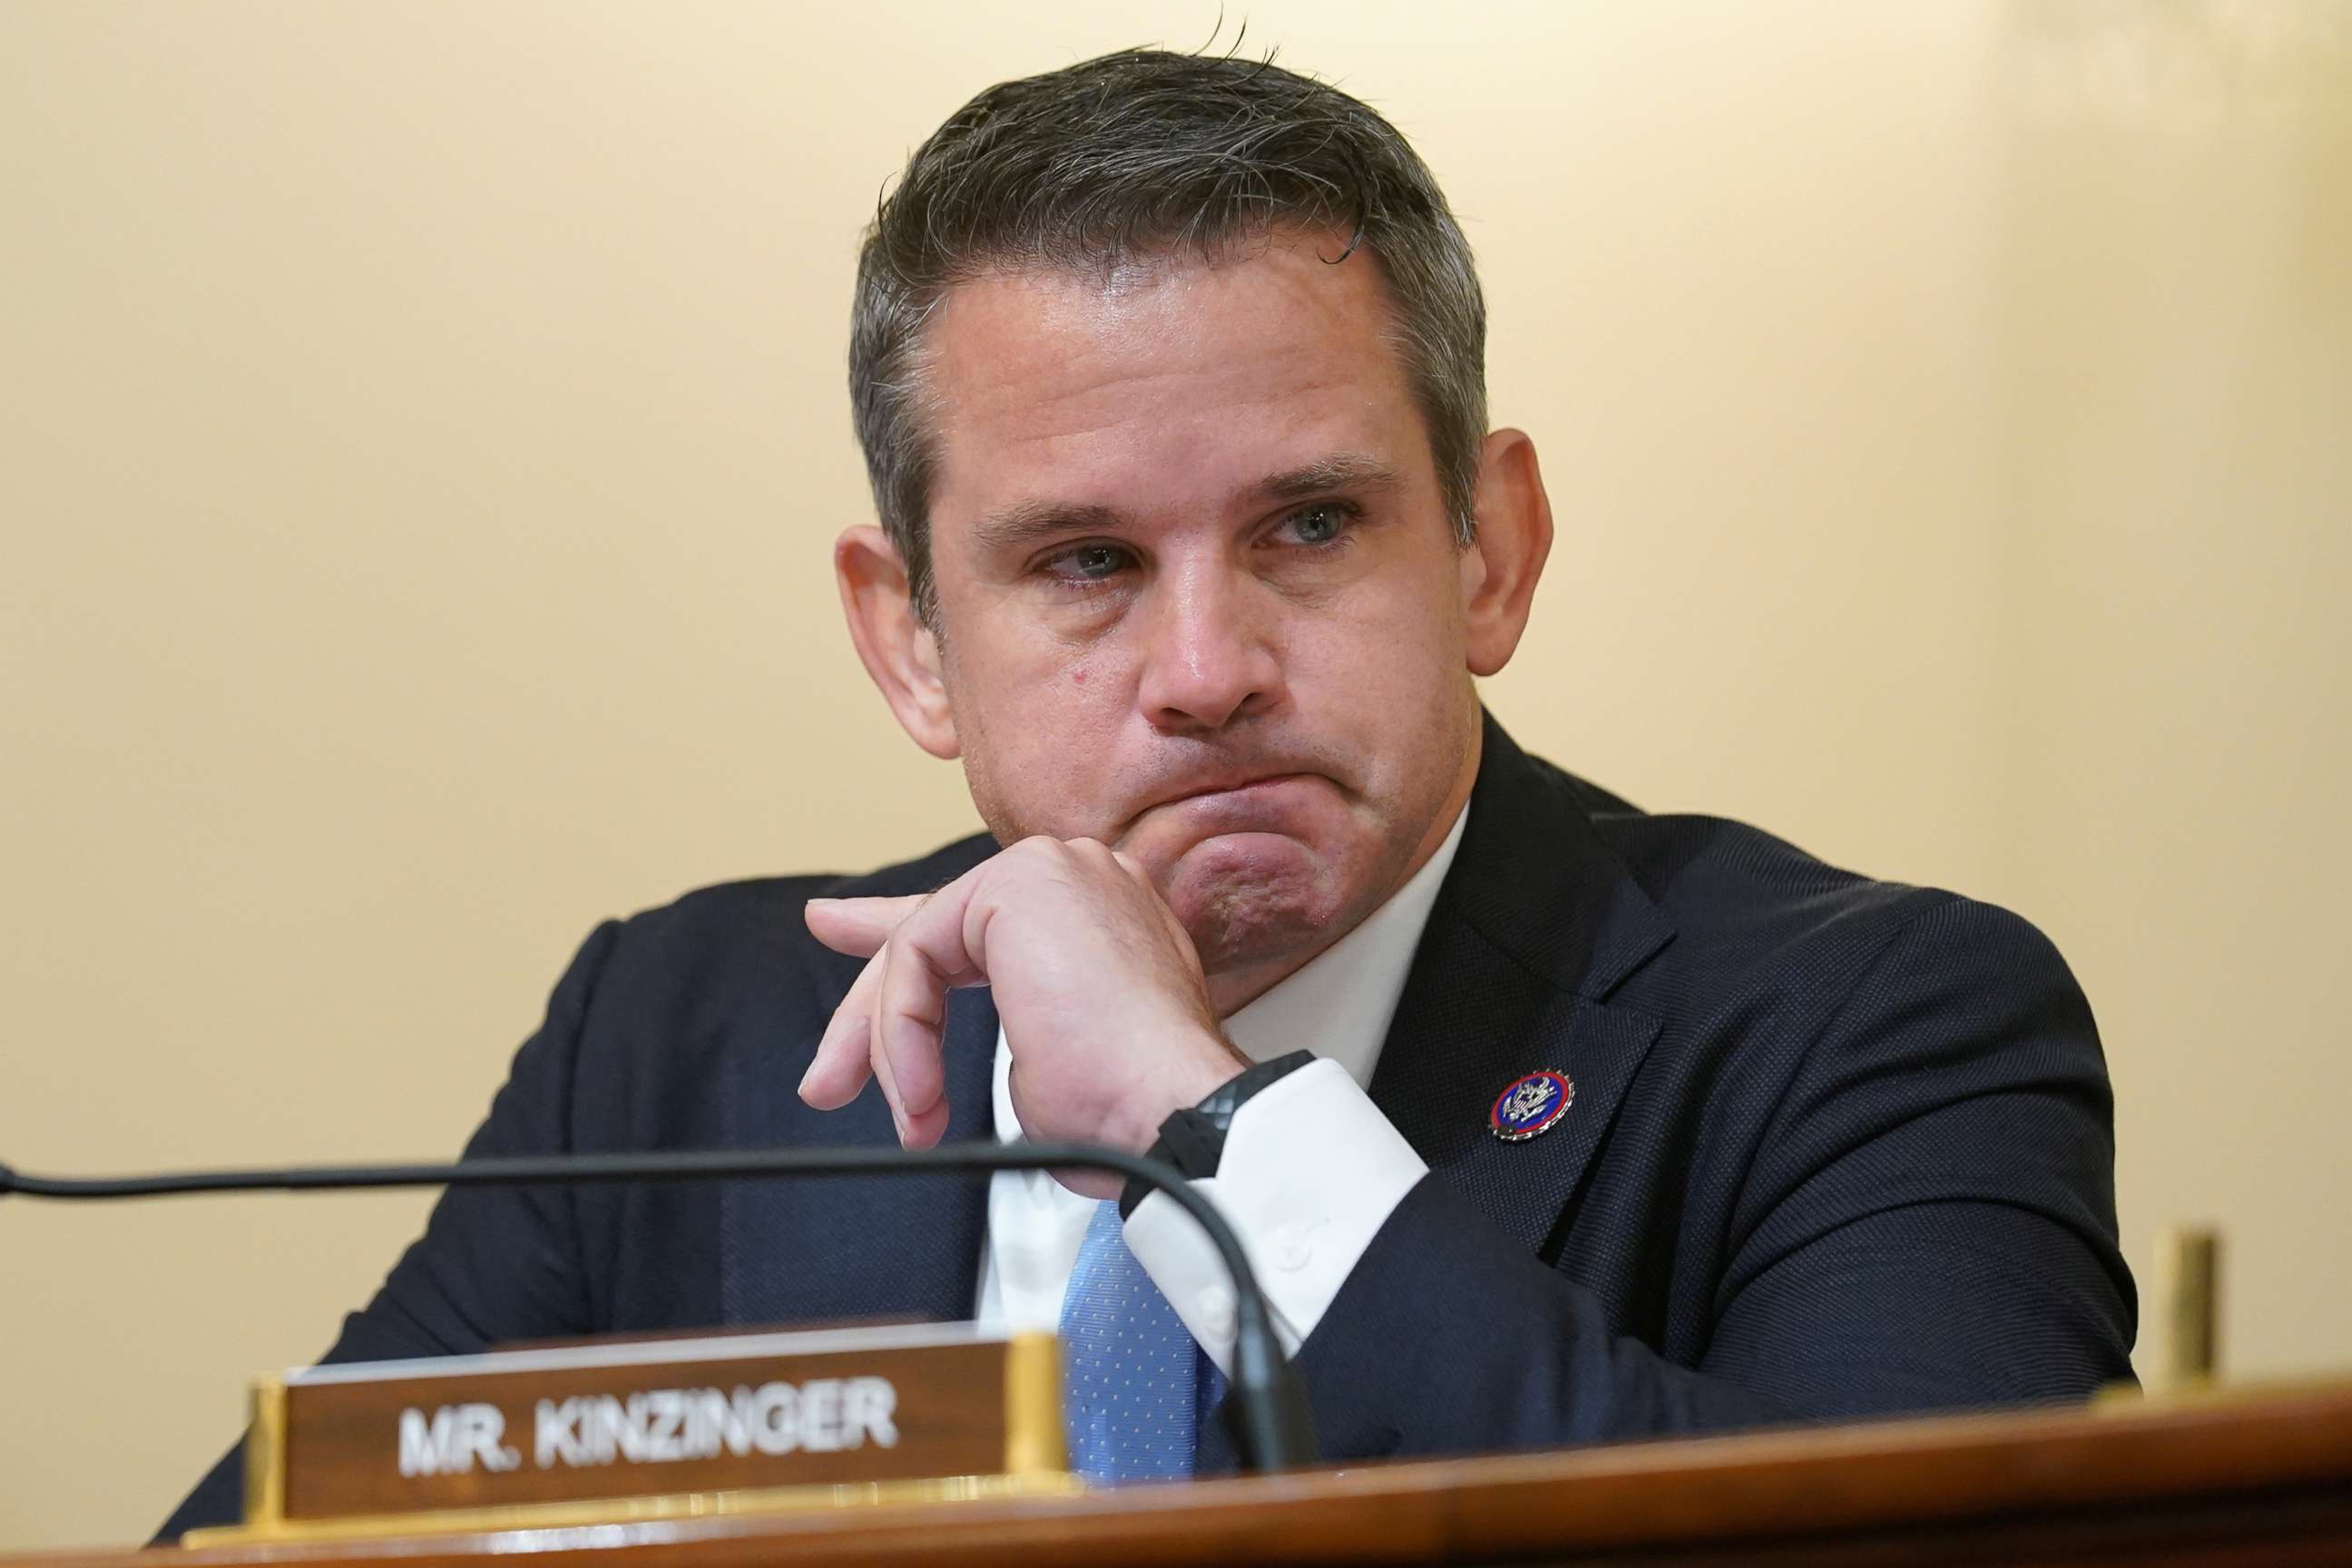 PHOTO: Rep. Adam Kinzinger listens during the House select committee hearing on the Jan. 6 attack on Capitol Hill in Washington, D.C., July 27, 2021.